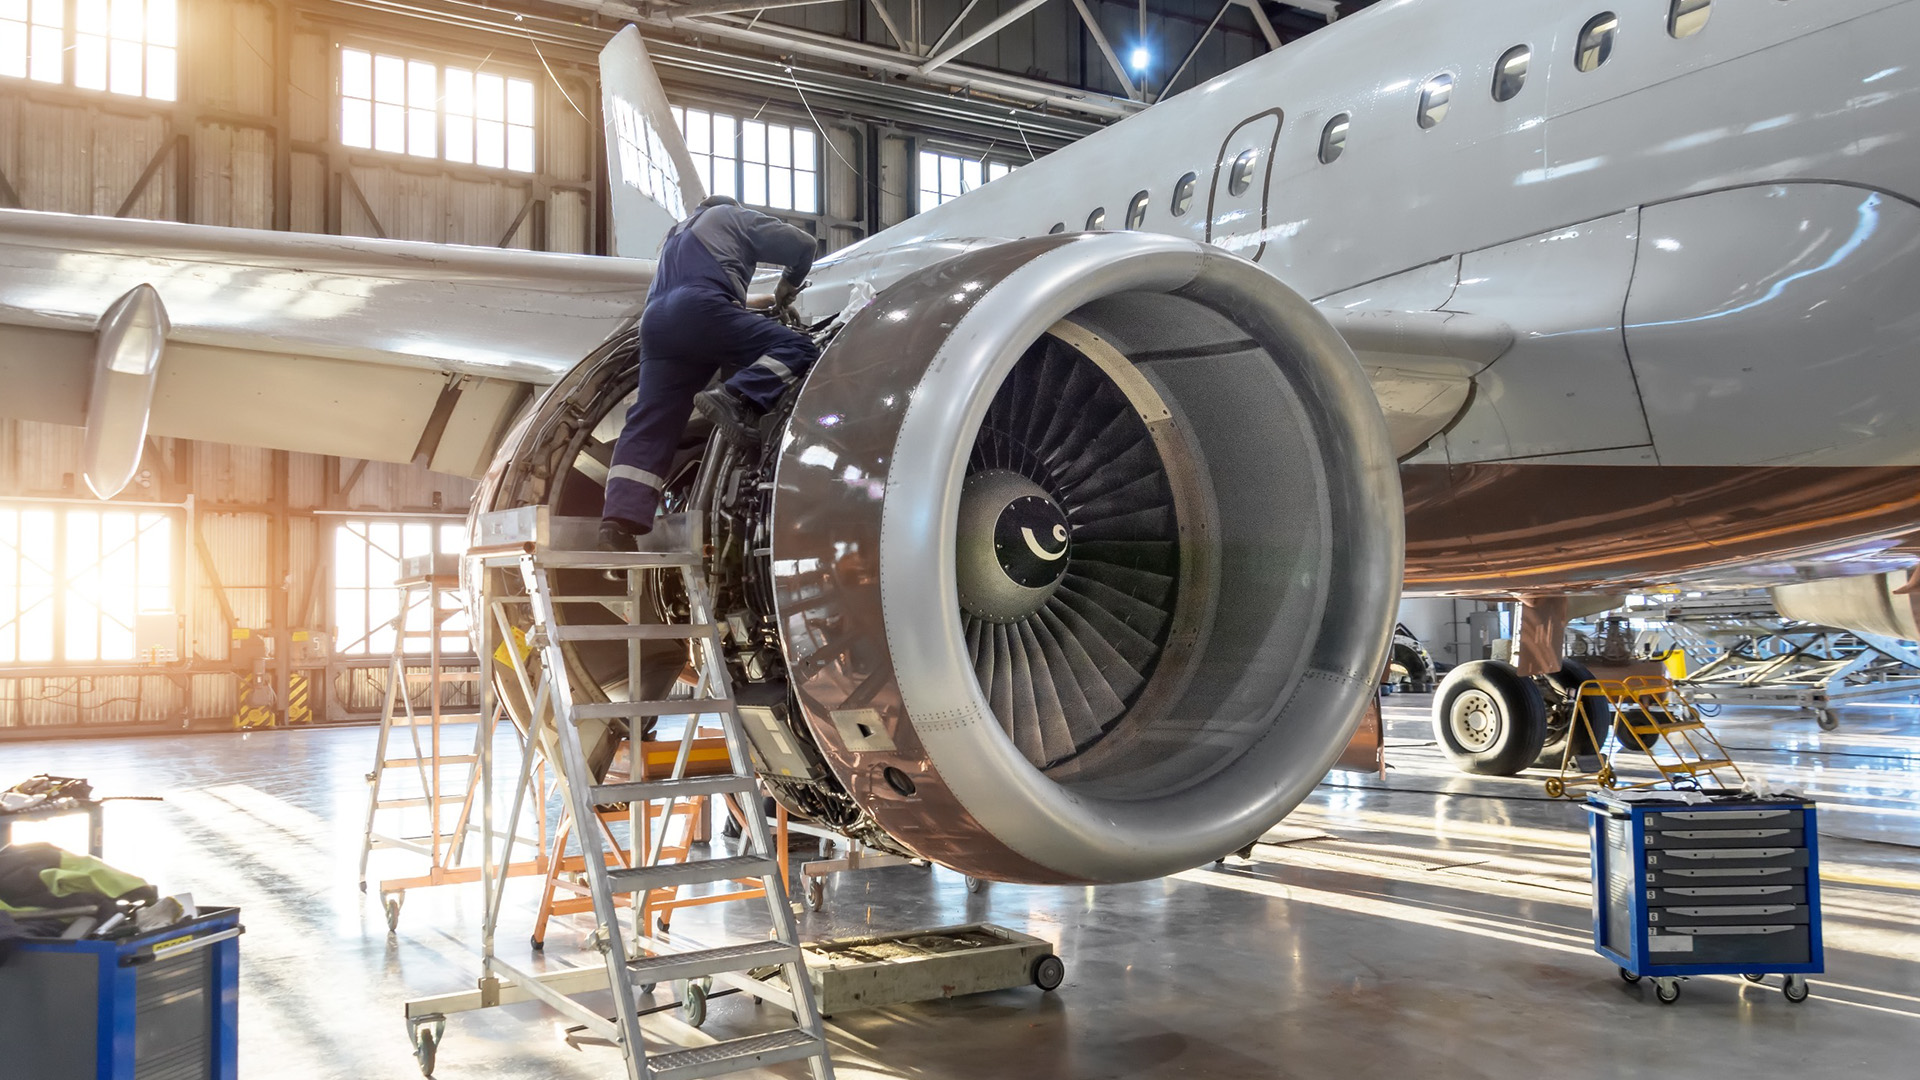 A sustainable approach to engine building and aeronautics 